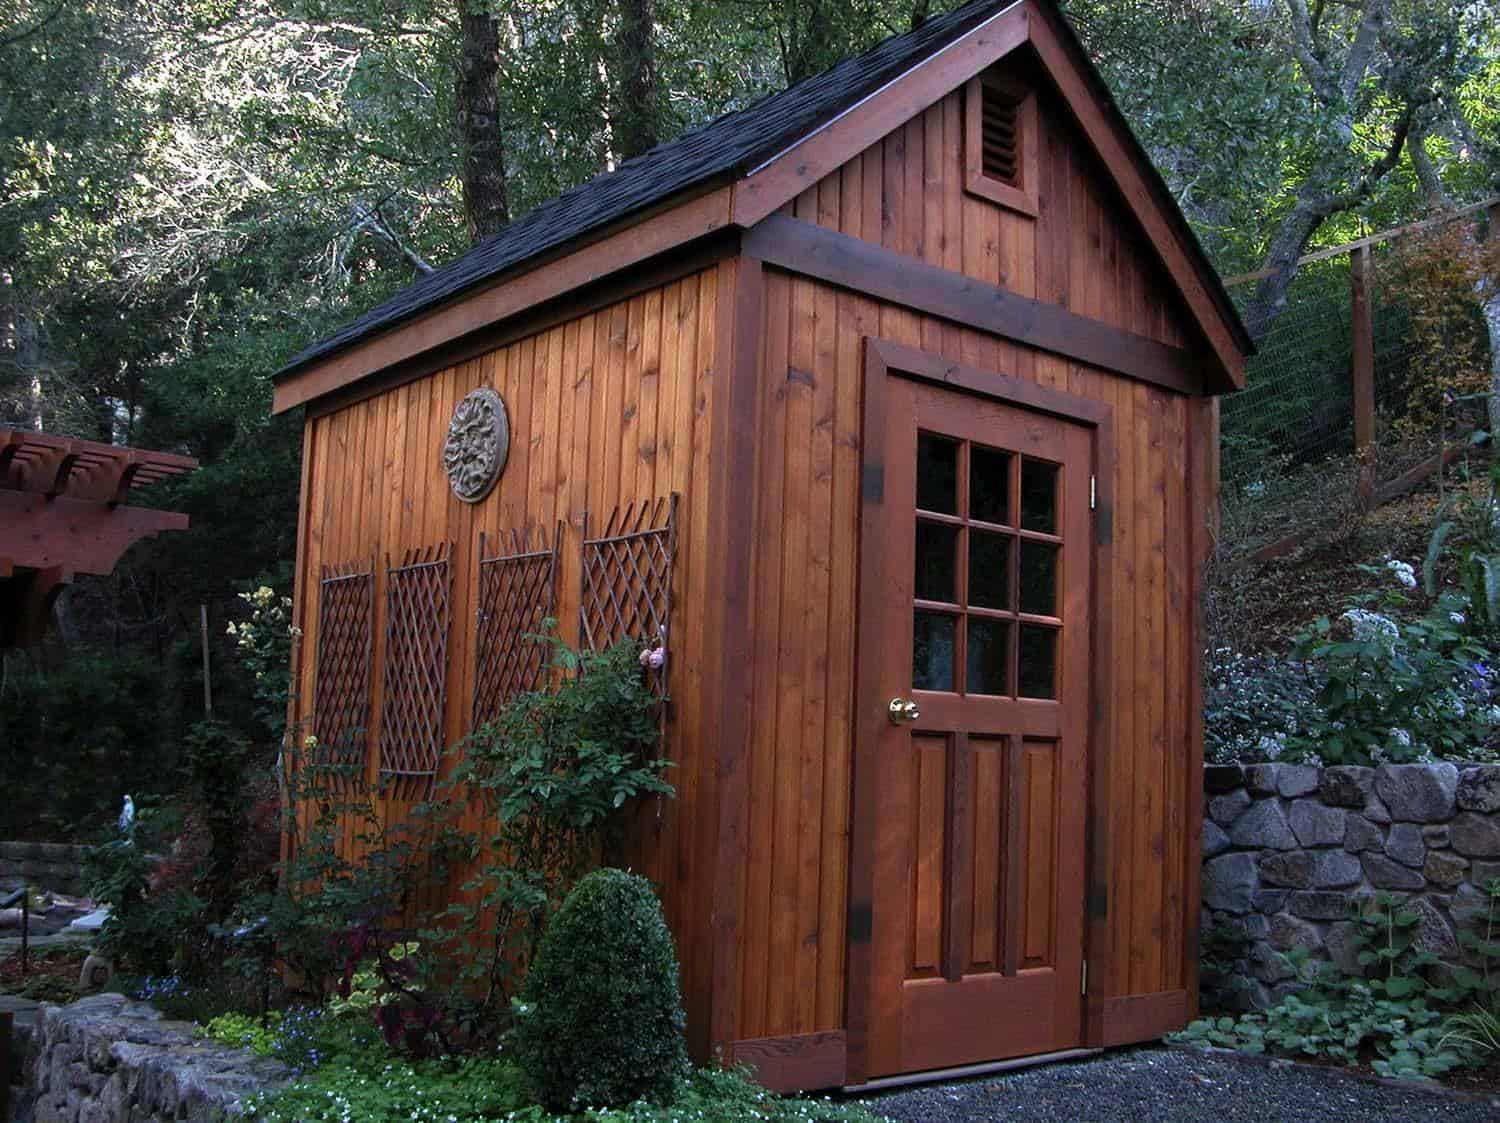 This Garden Shed